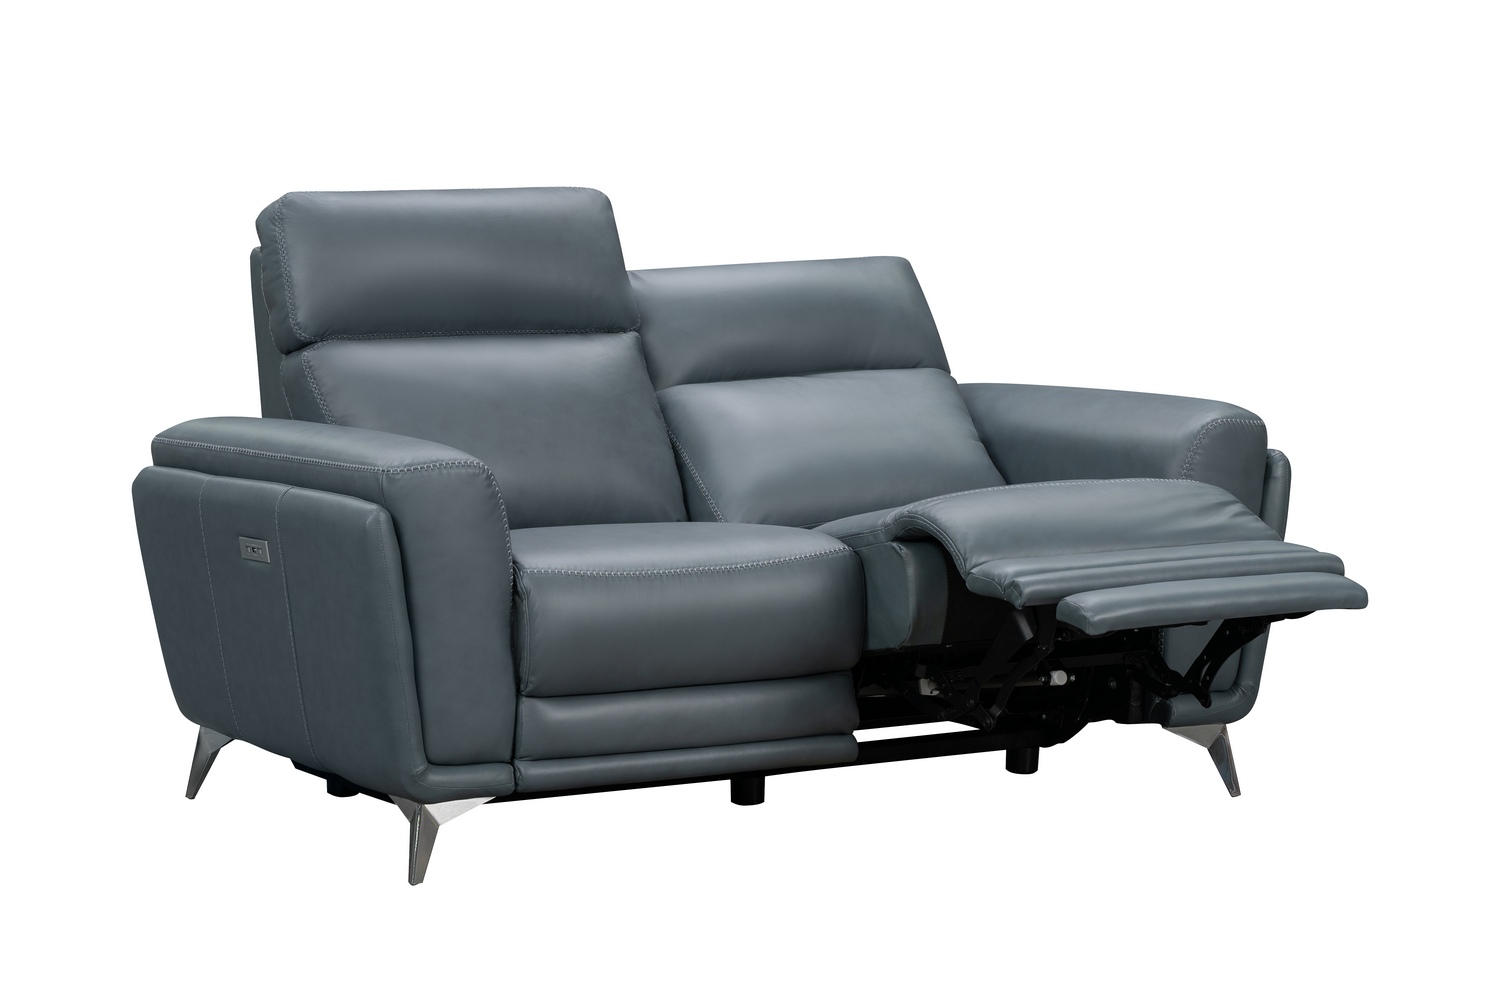 Barcalounger Cameron Power Reclining Loveseat with Power Head Rests - Masen Bluegray/Leather Match